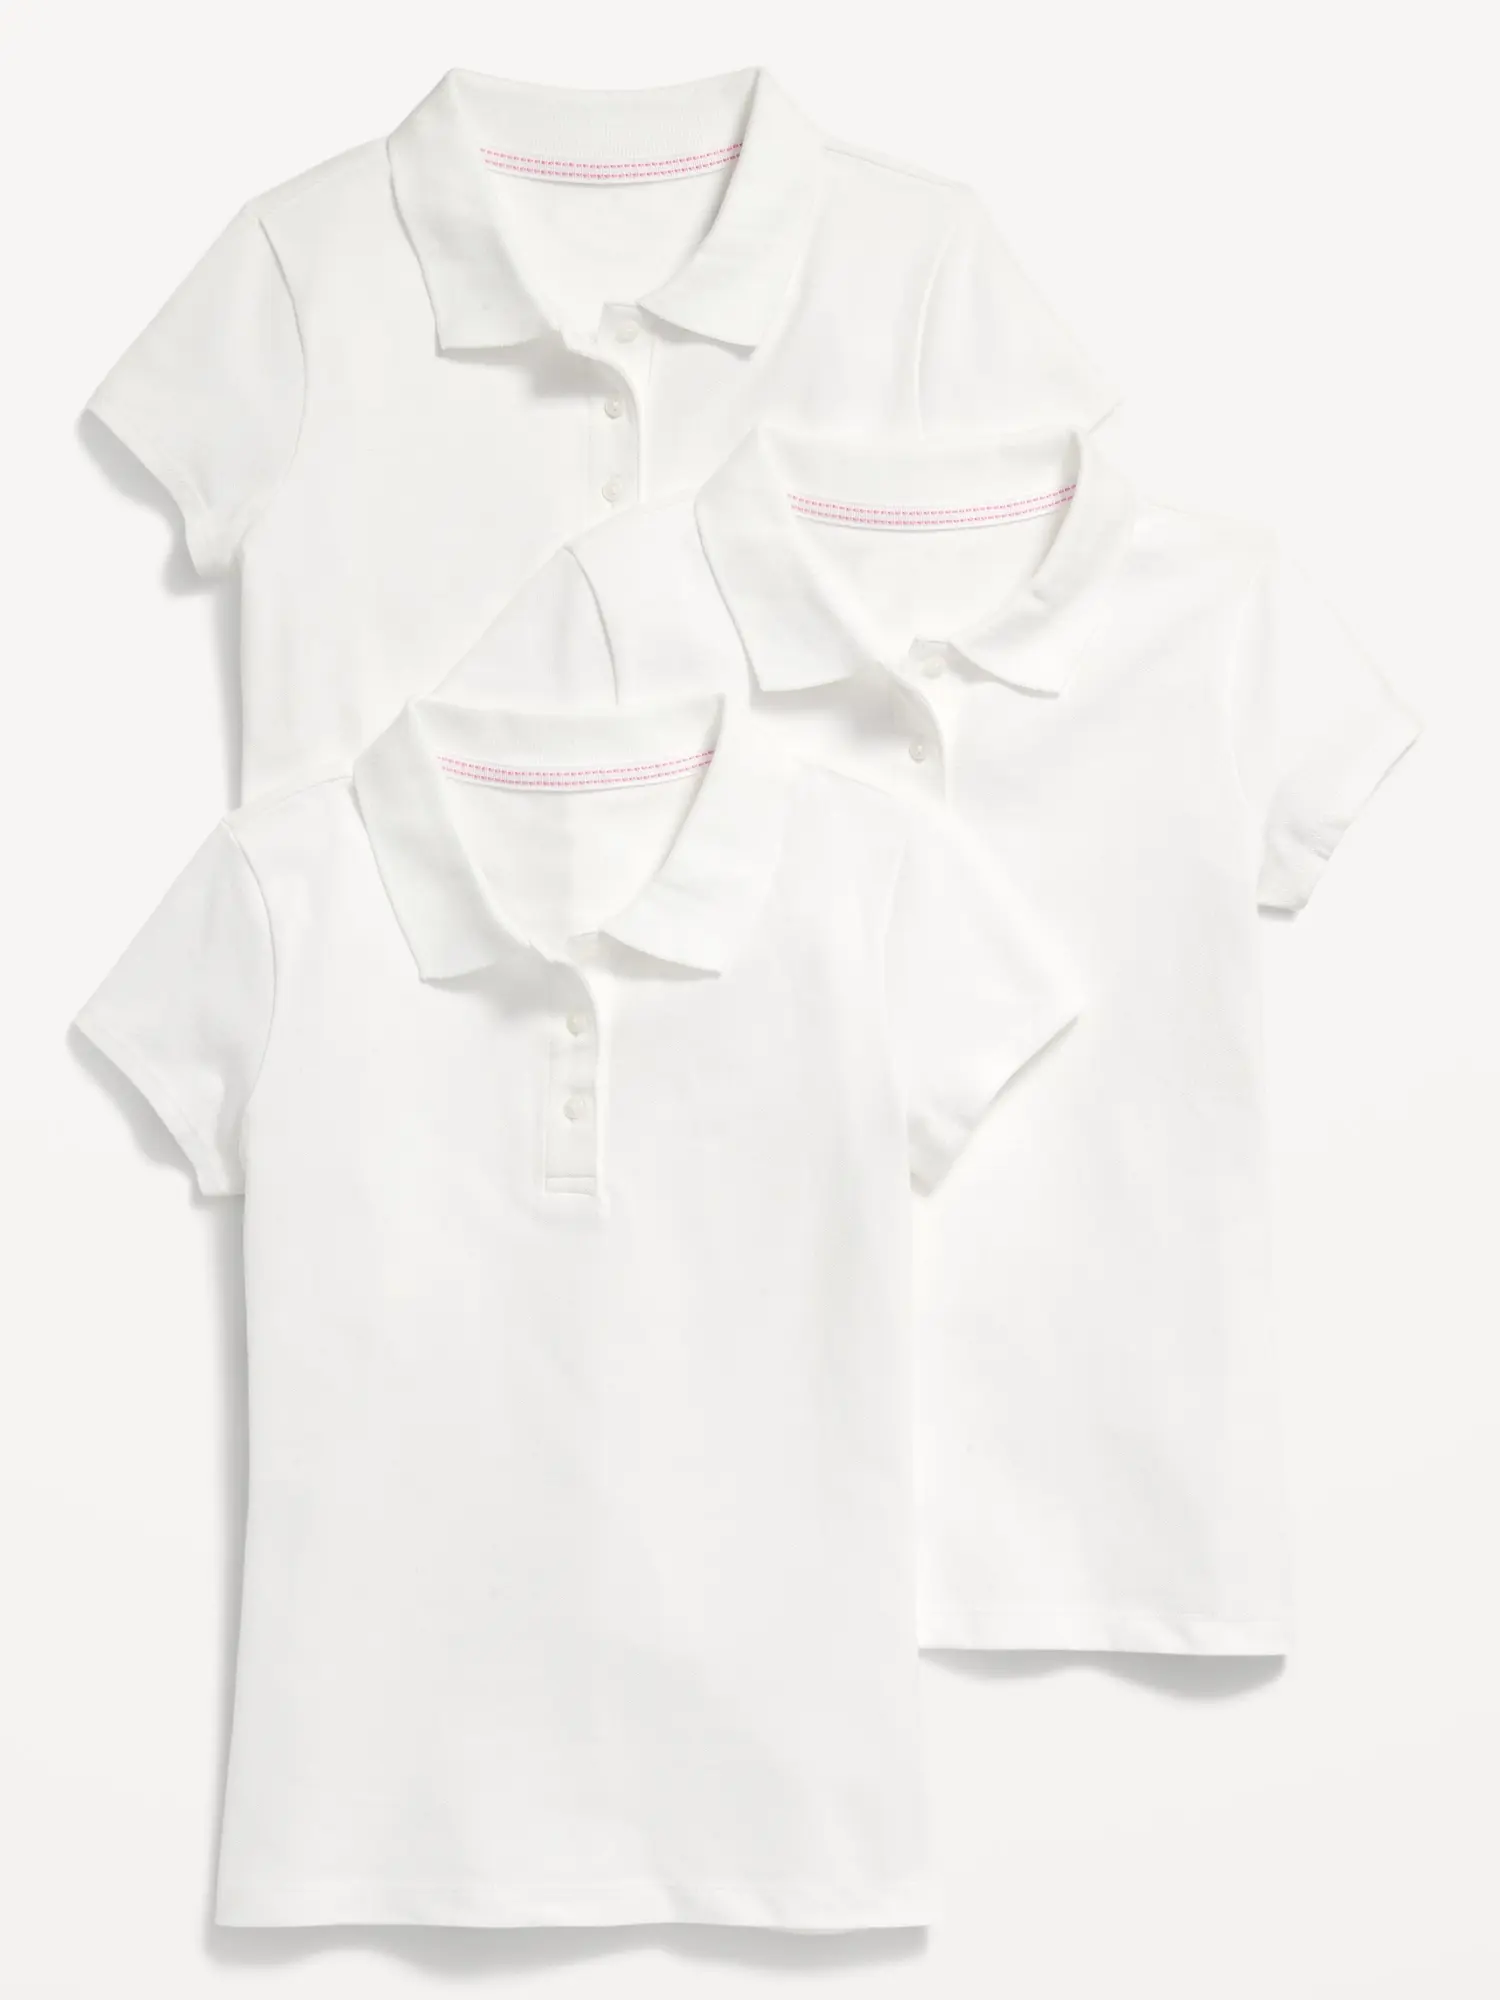 Old Navy Uniform Pique Polo Shirt 3-Pack for Girls white. 1